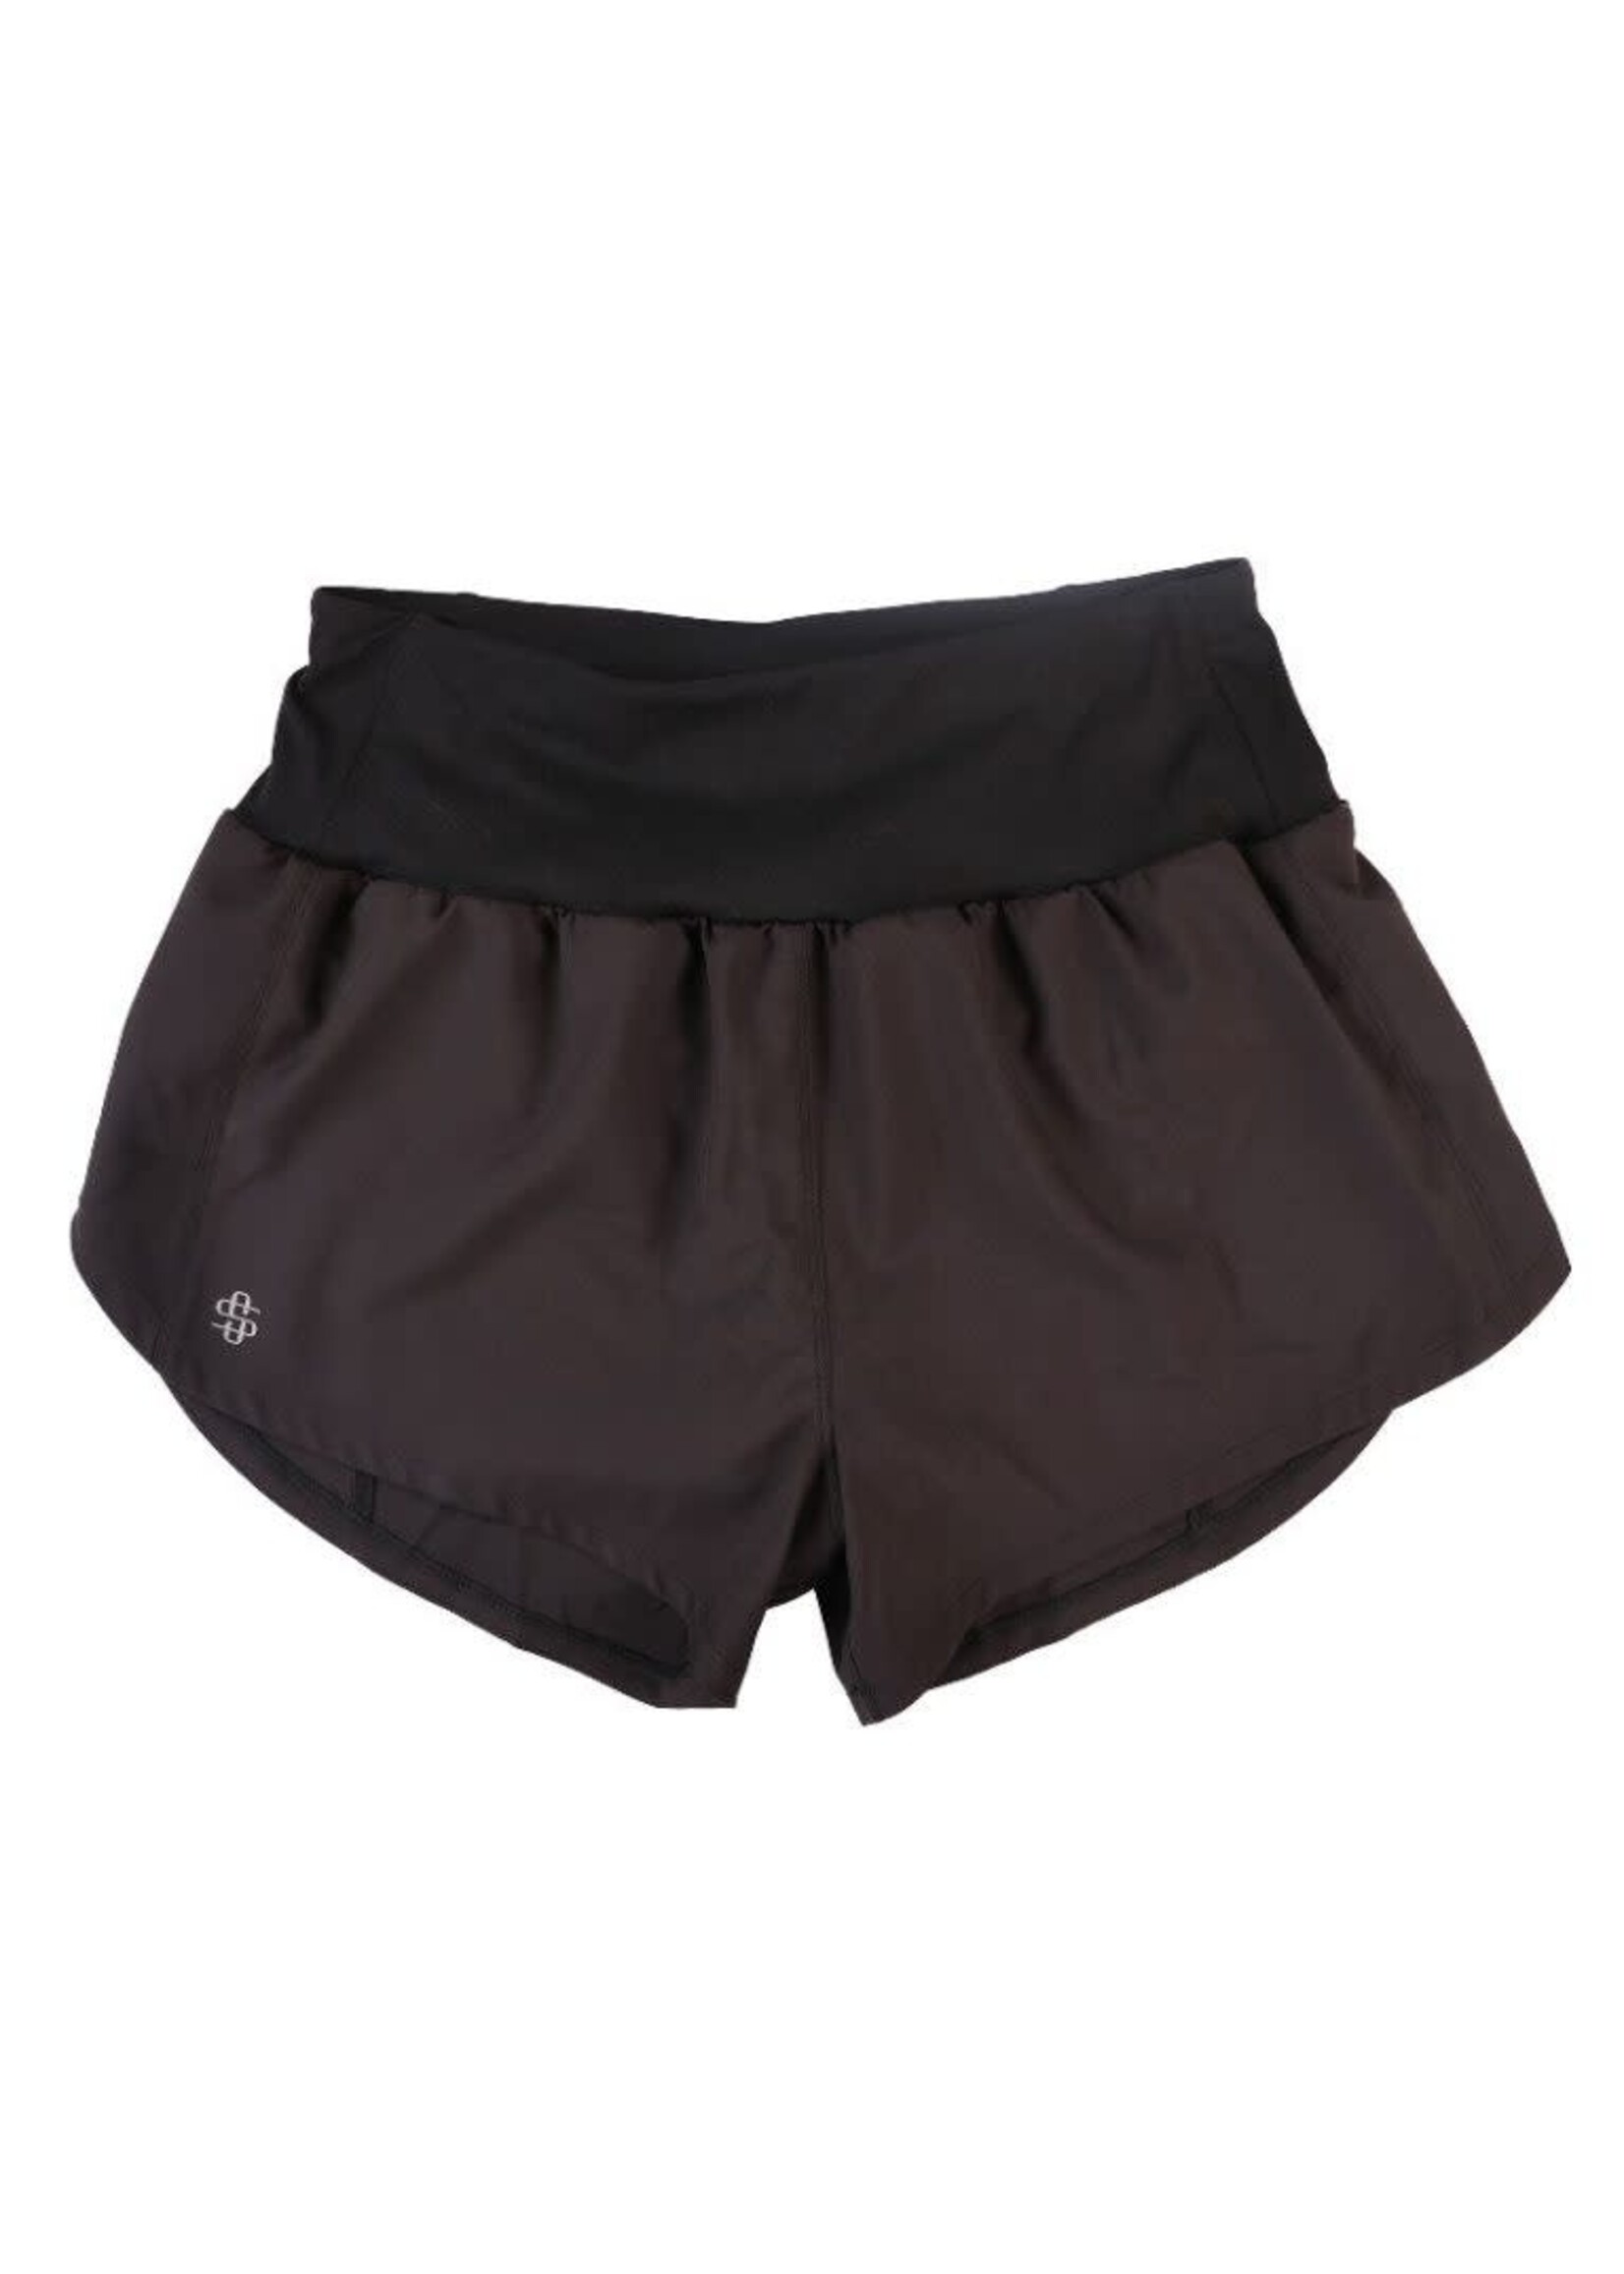 Simply Southern Collection Tech Shorts